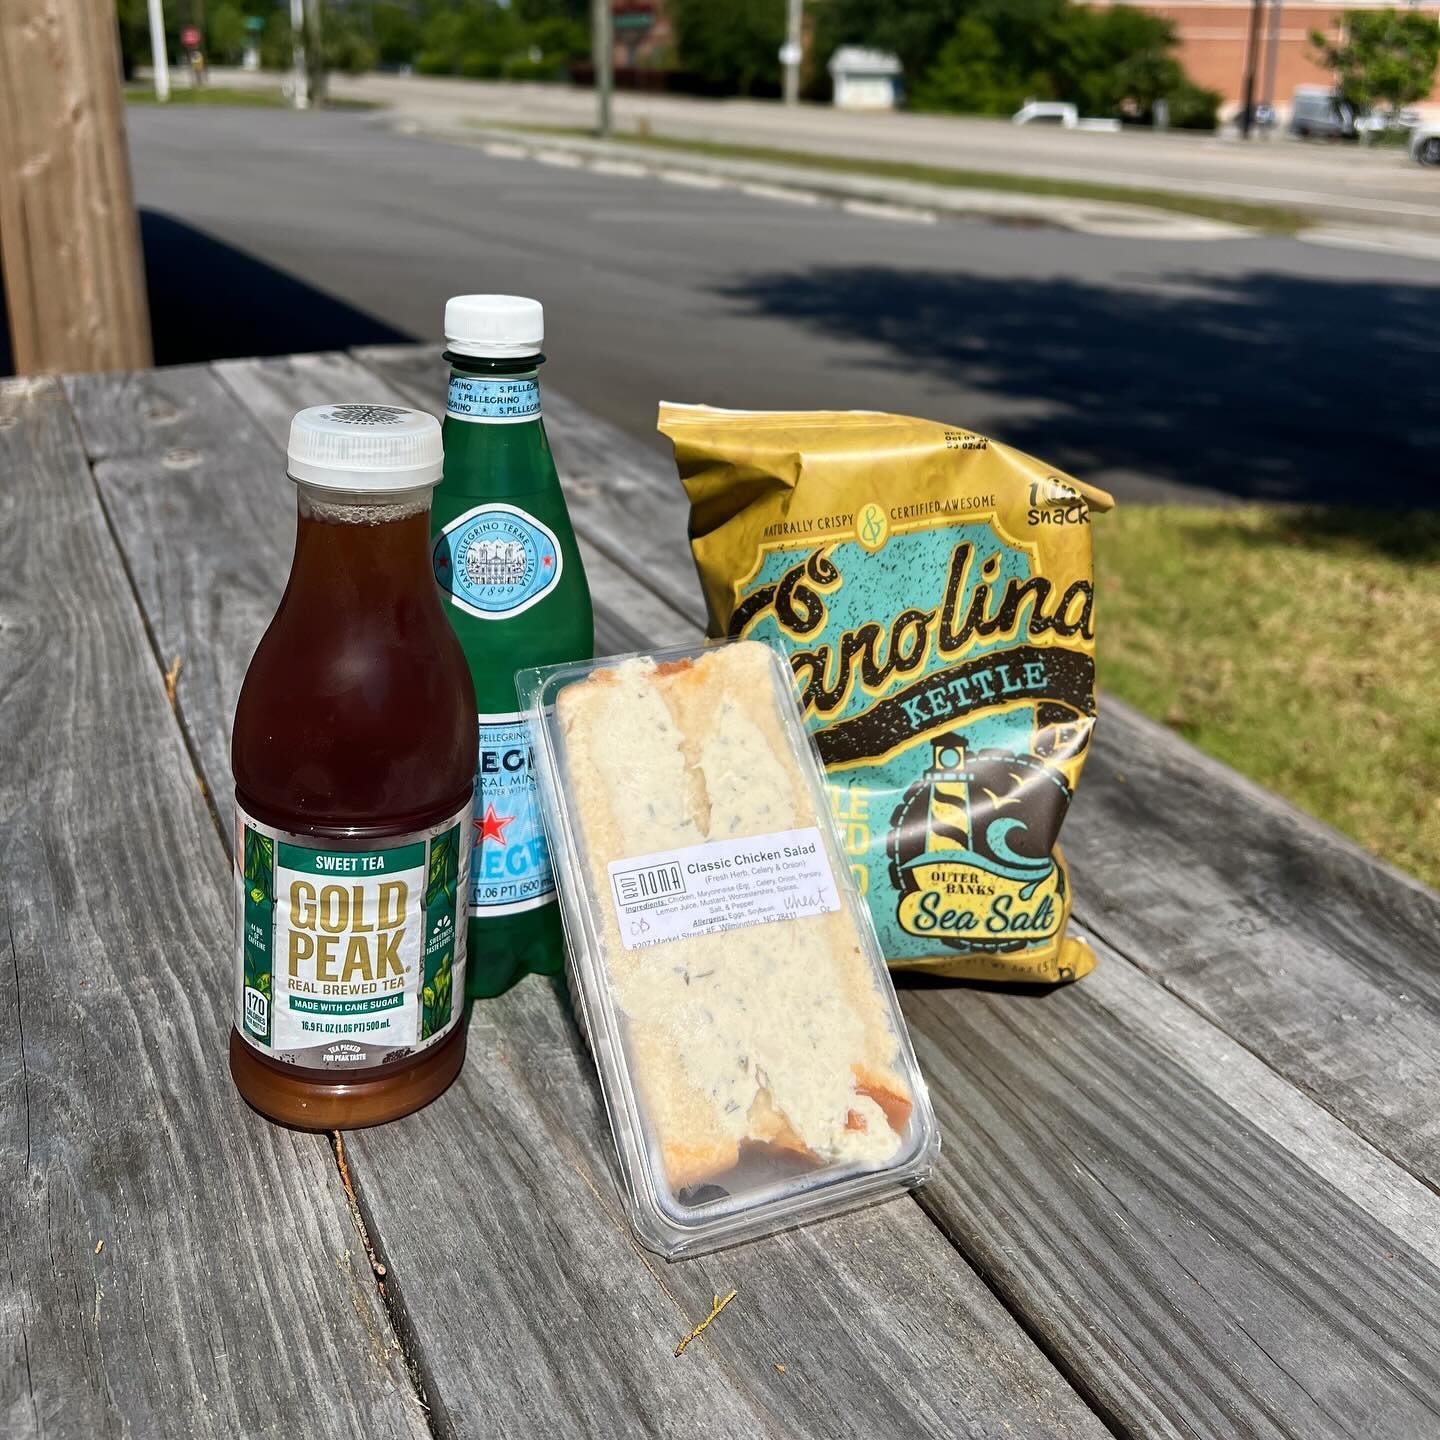 We have lots of options for Grab &amp; Go lunches here at 7006 Wrightsville Ave! Sandwiches, salads, chicken salad or pimento cheese with crackers, Boat Bites, kettle chips, drinks and more!!